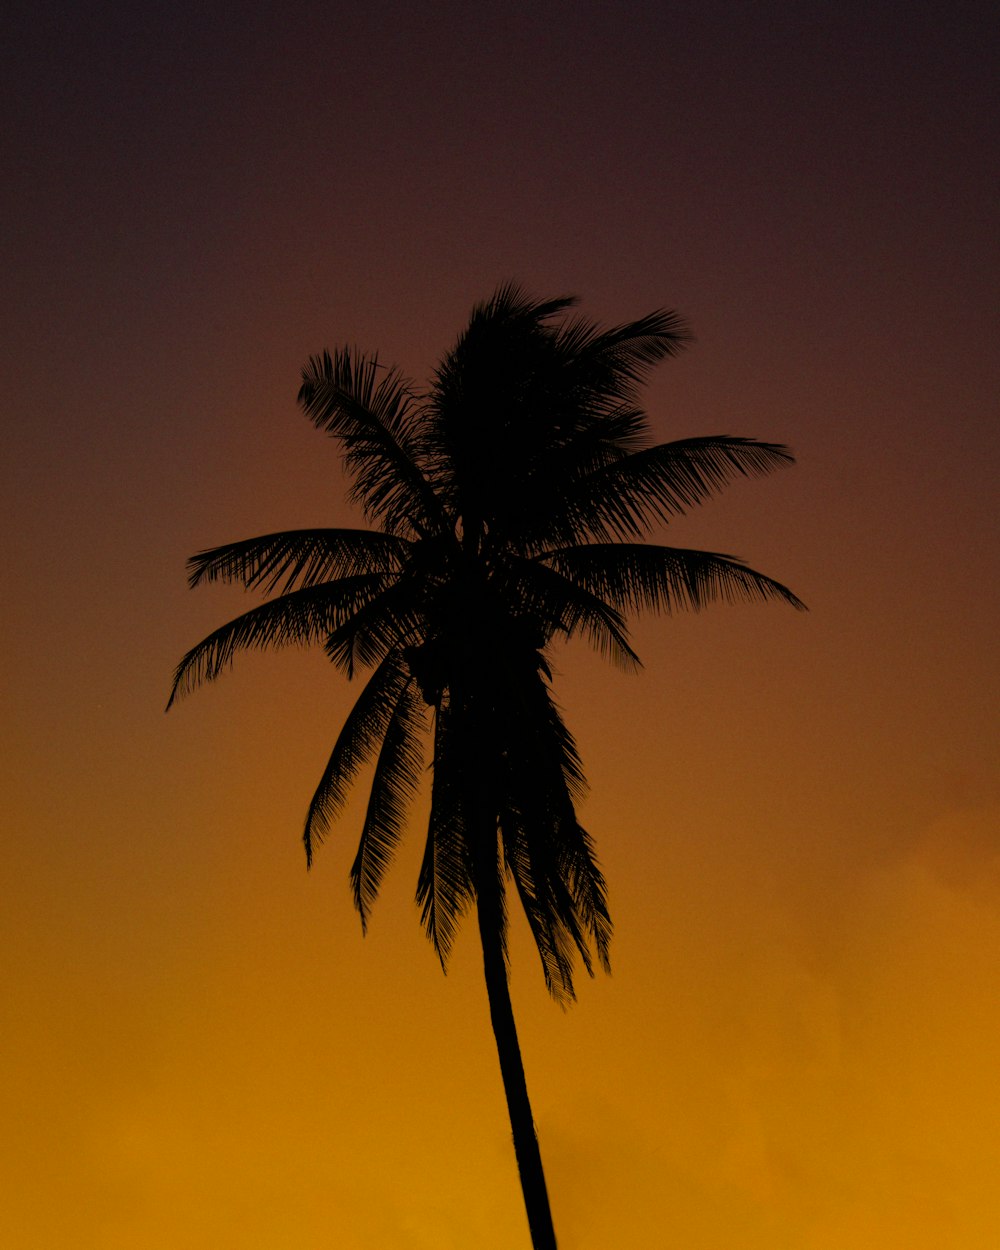 a palm tree against a colorful background